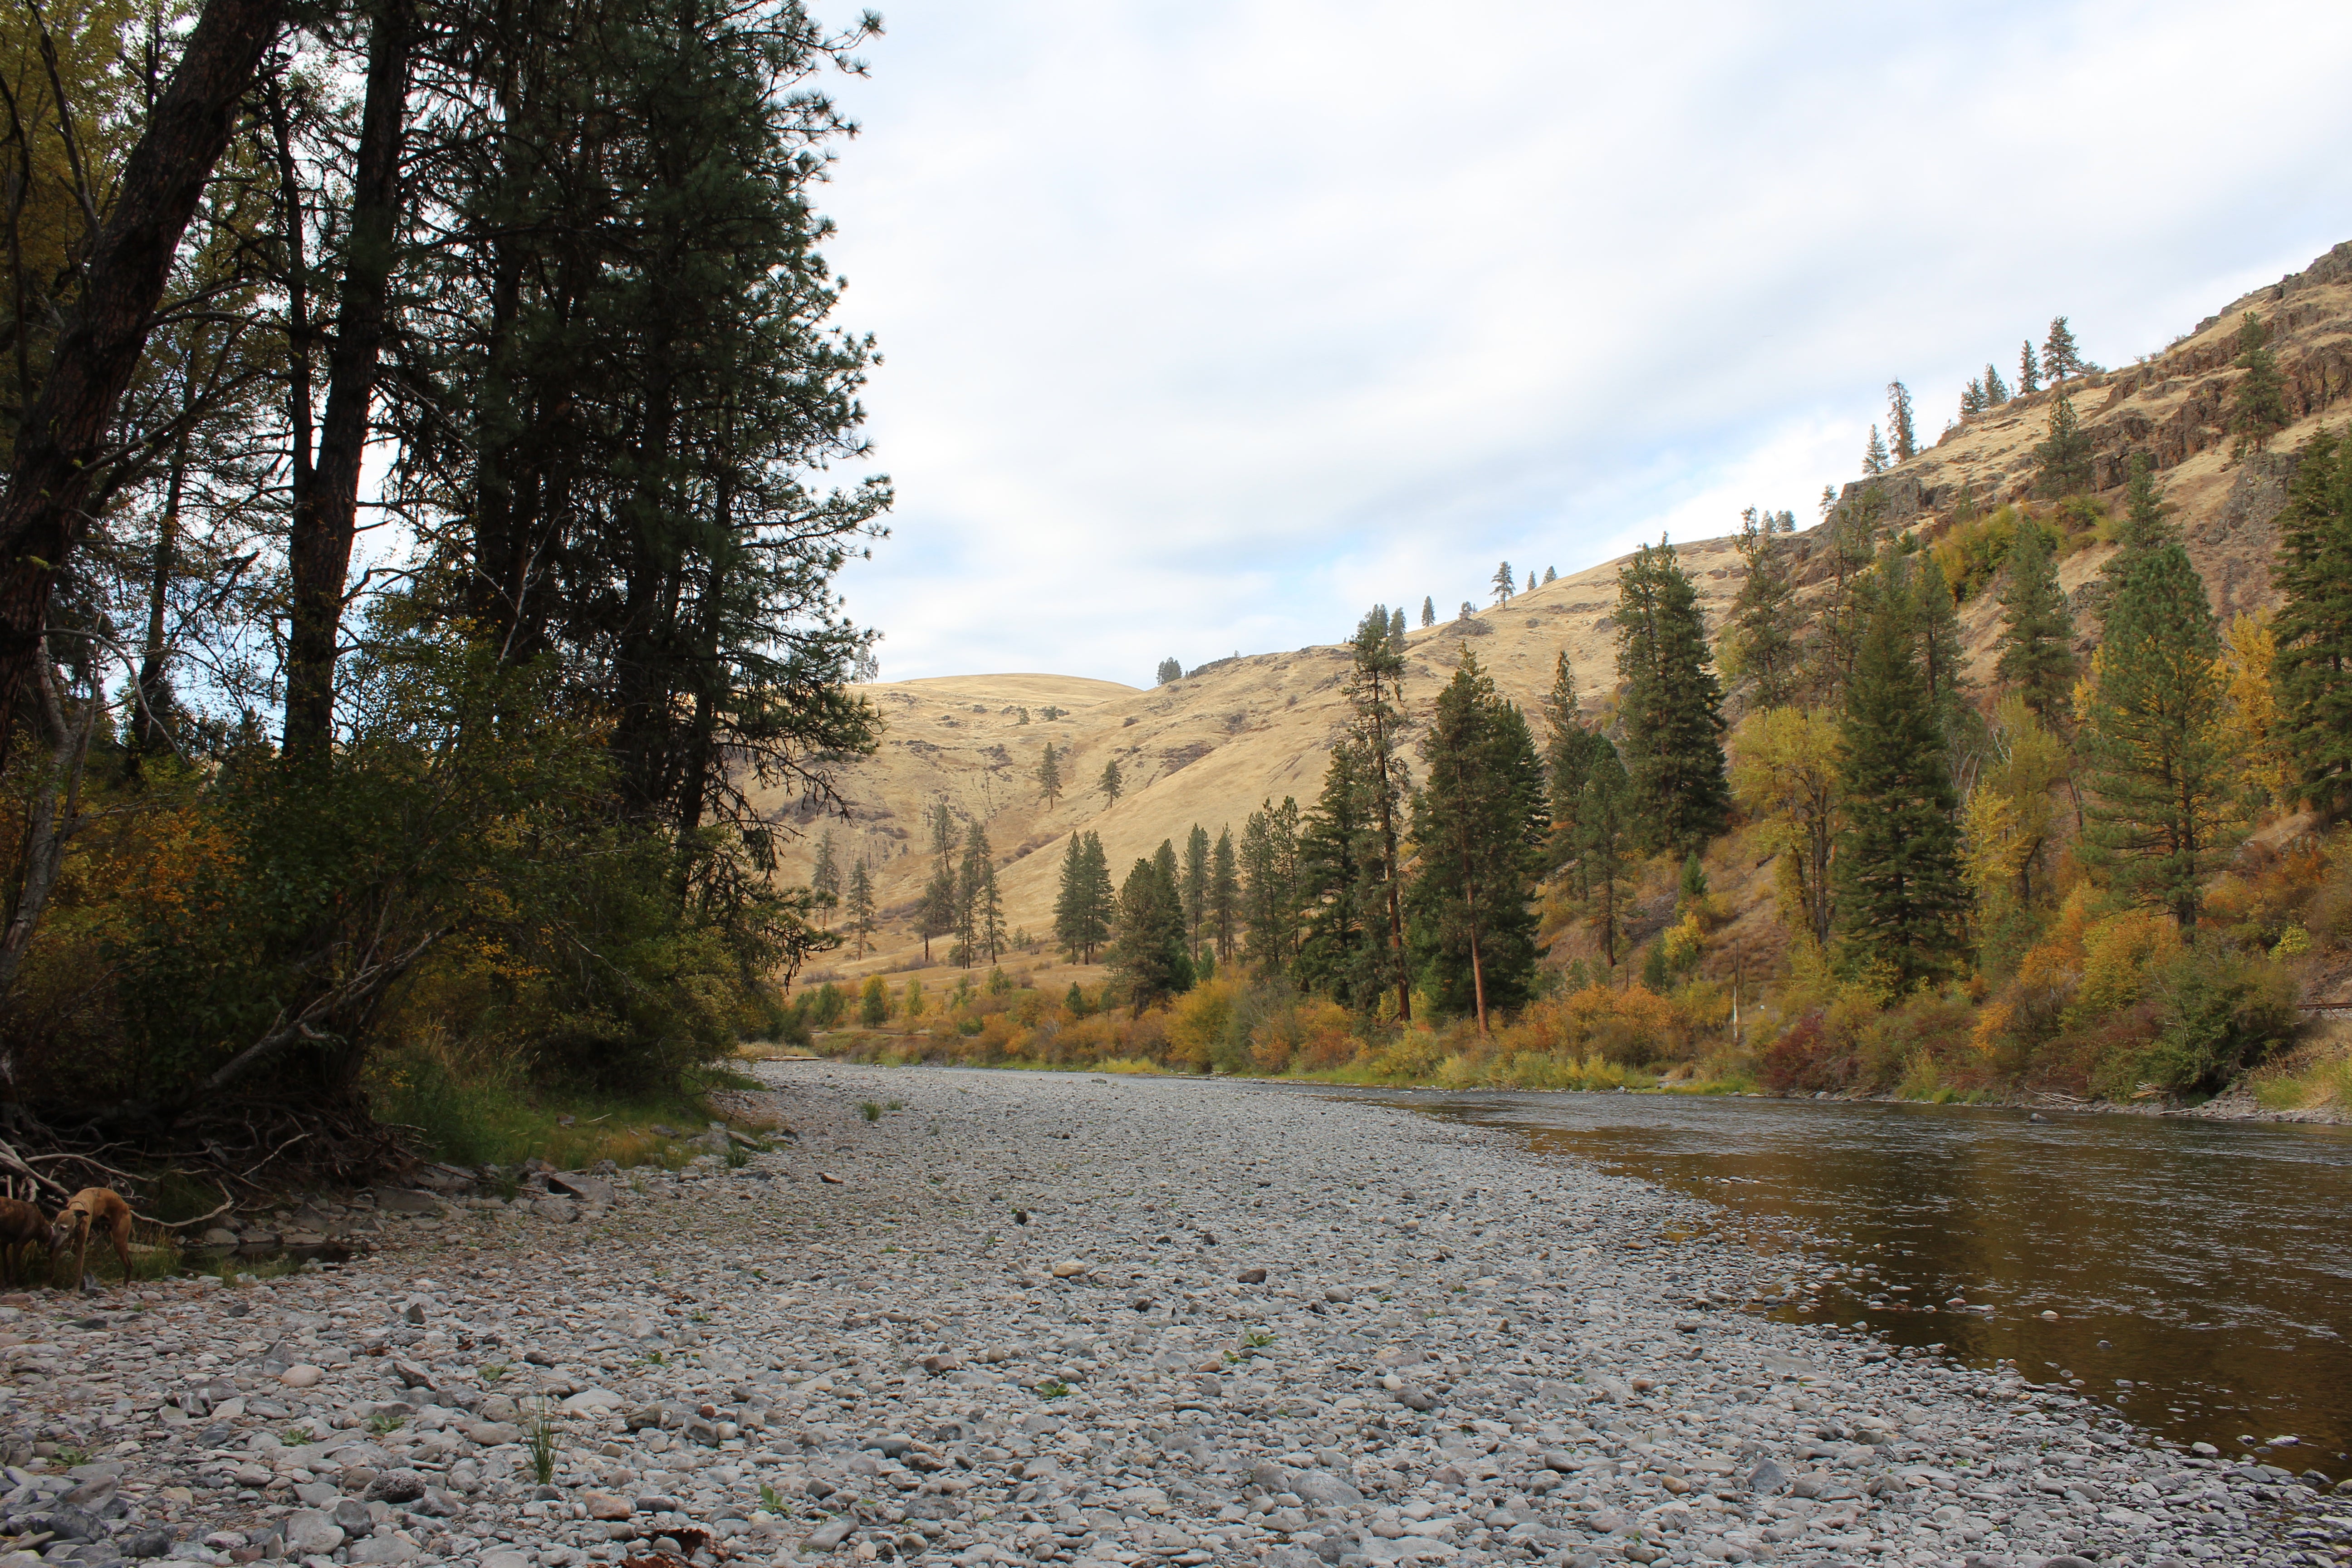 Short hike down to the Wallowa River and outstanding scenery.